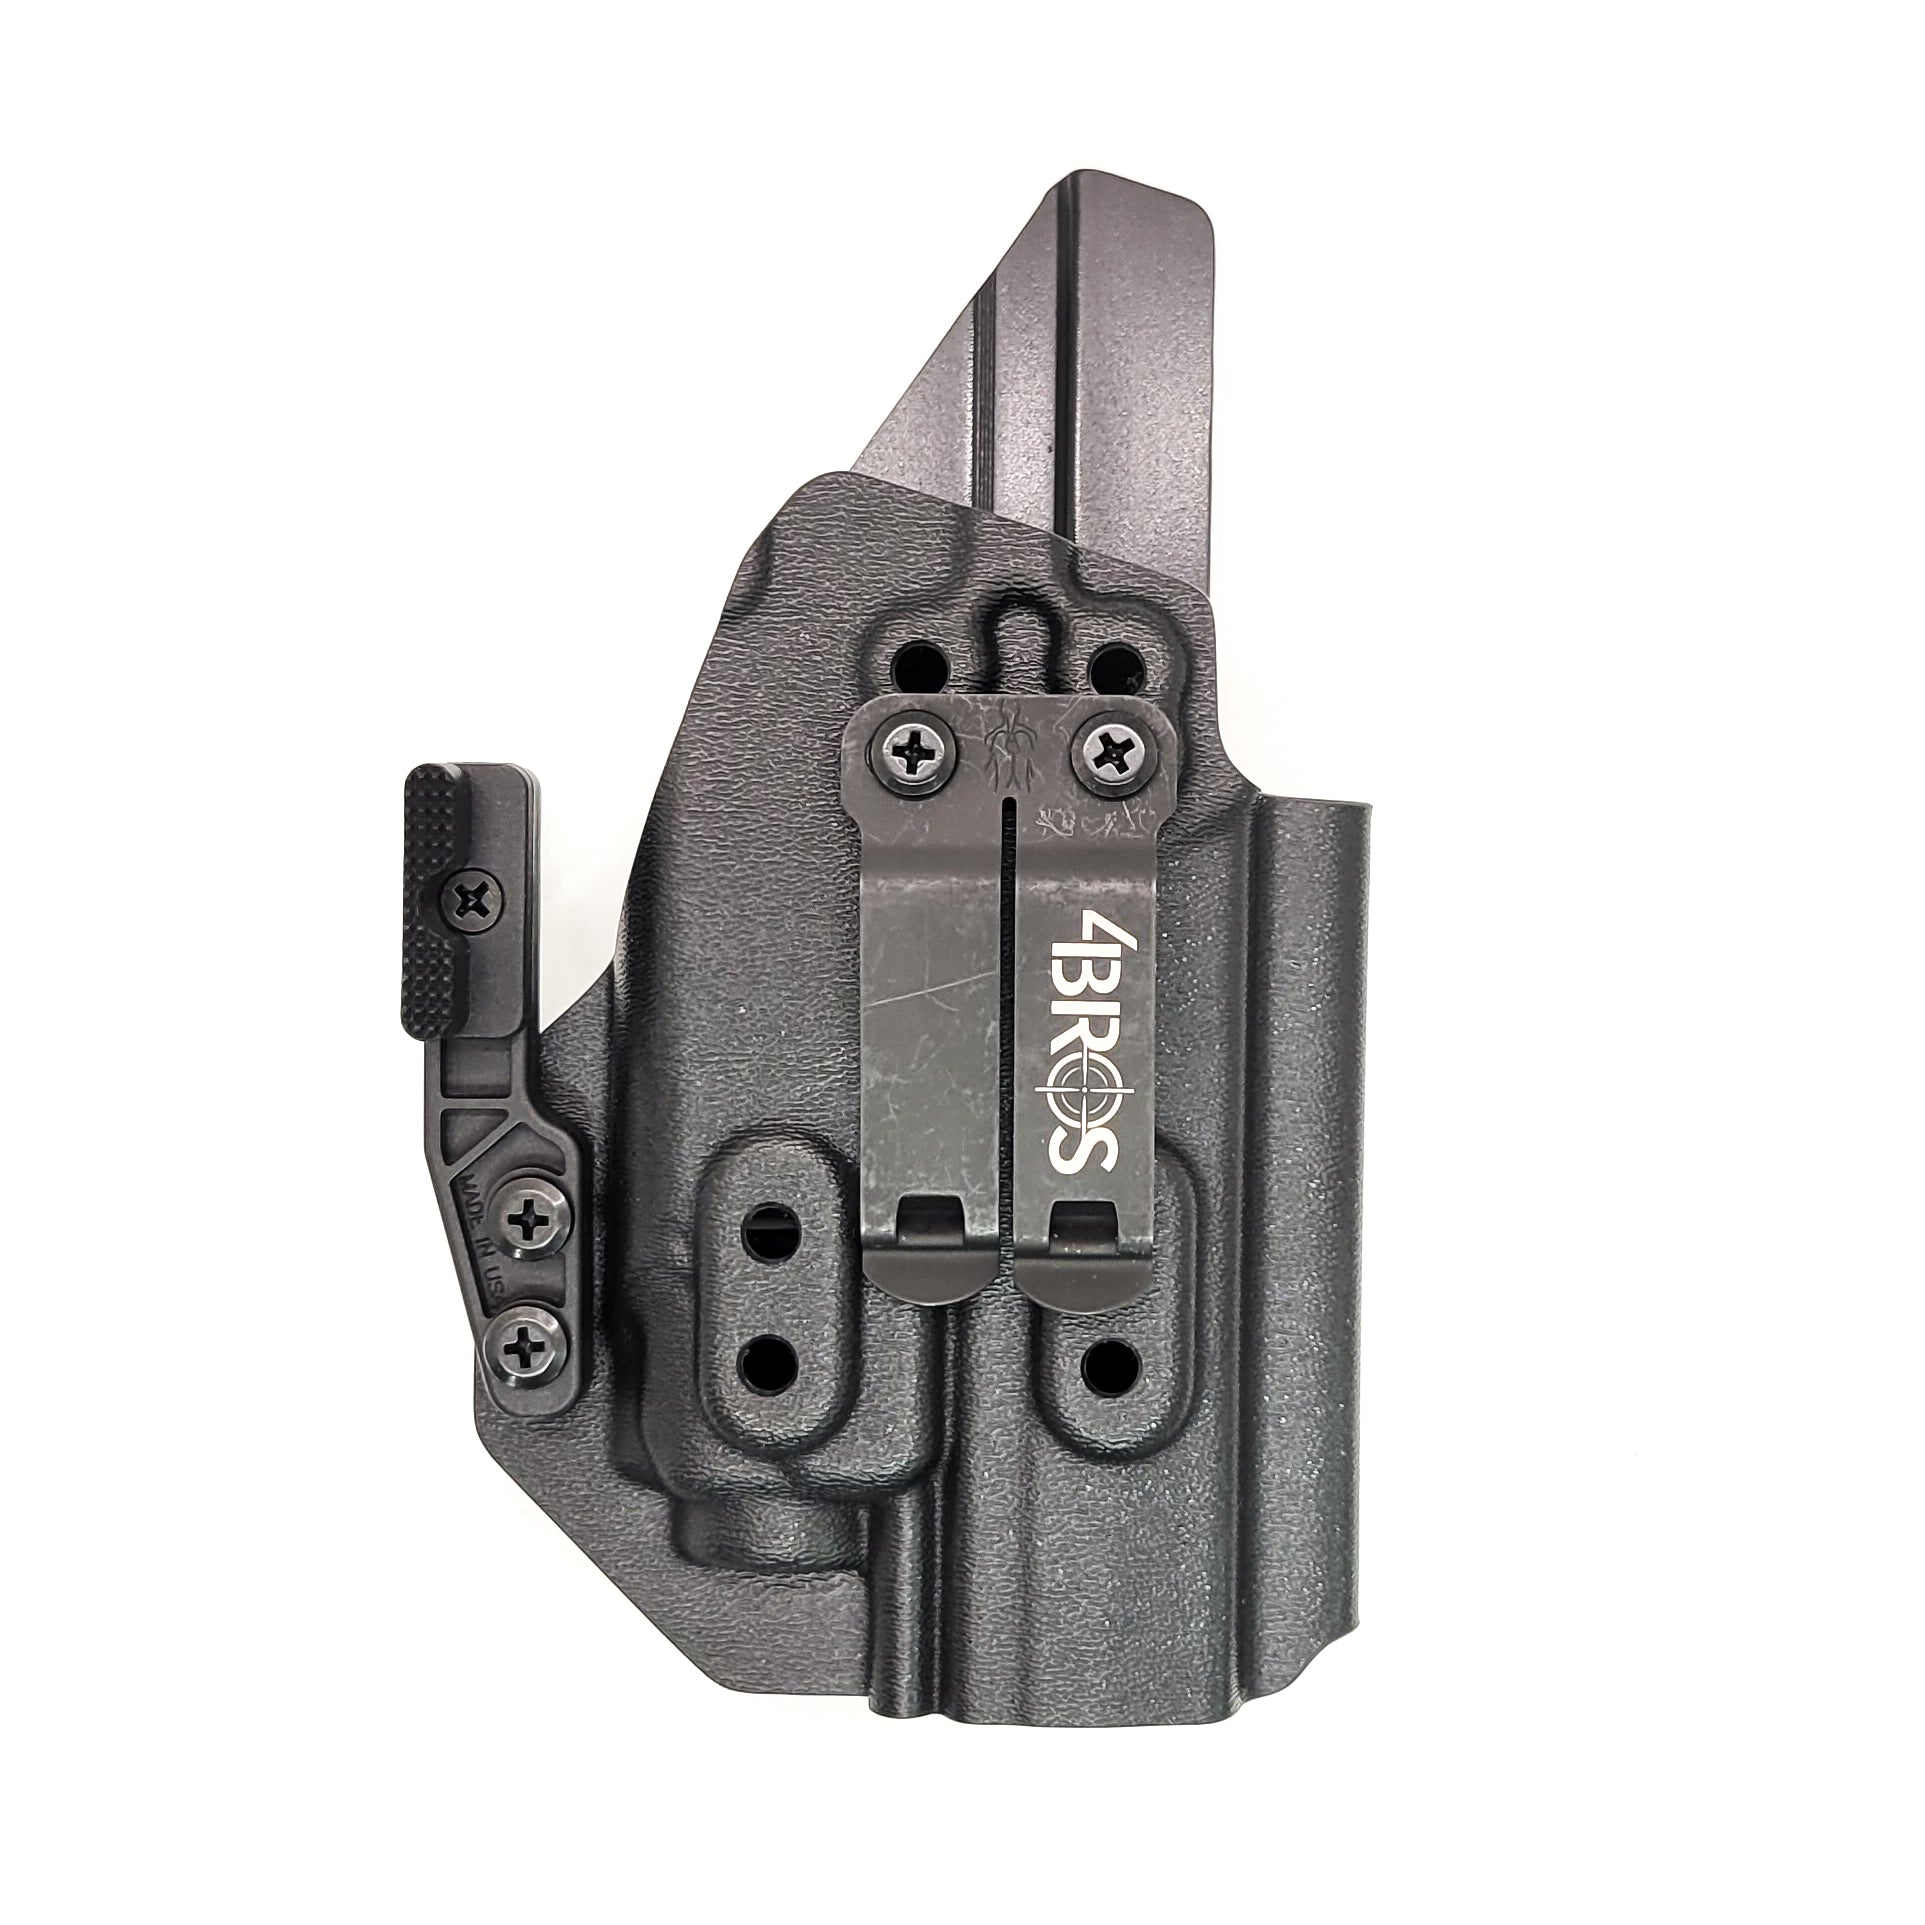 For the best, Inside Waistband IWB AIWB Kydex Holster for the FN 509 compact, 509, 509 Tactical with the Streamlight TLR-8 or TLR-8A, shop Four Brothers Holsters. Open Muzzle, adjustable retention, cleared for suppressor height sights up to 3/8", full sweat guard, cut for red dot sights and optics. Made in the USA.